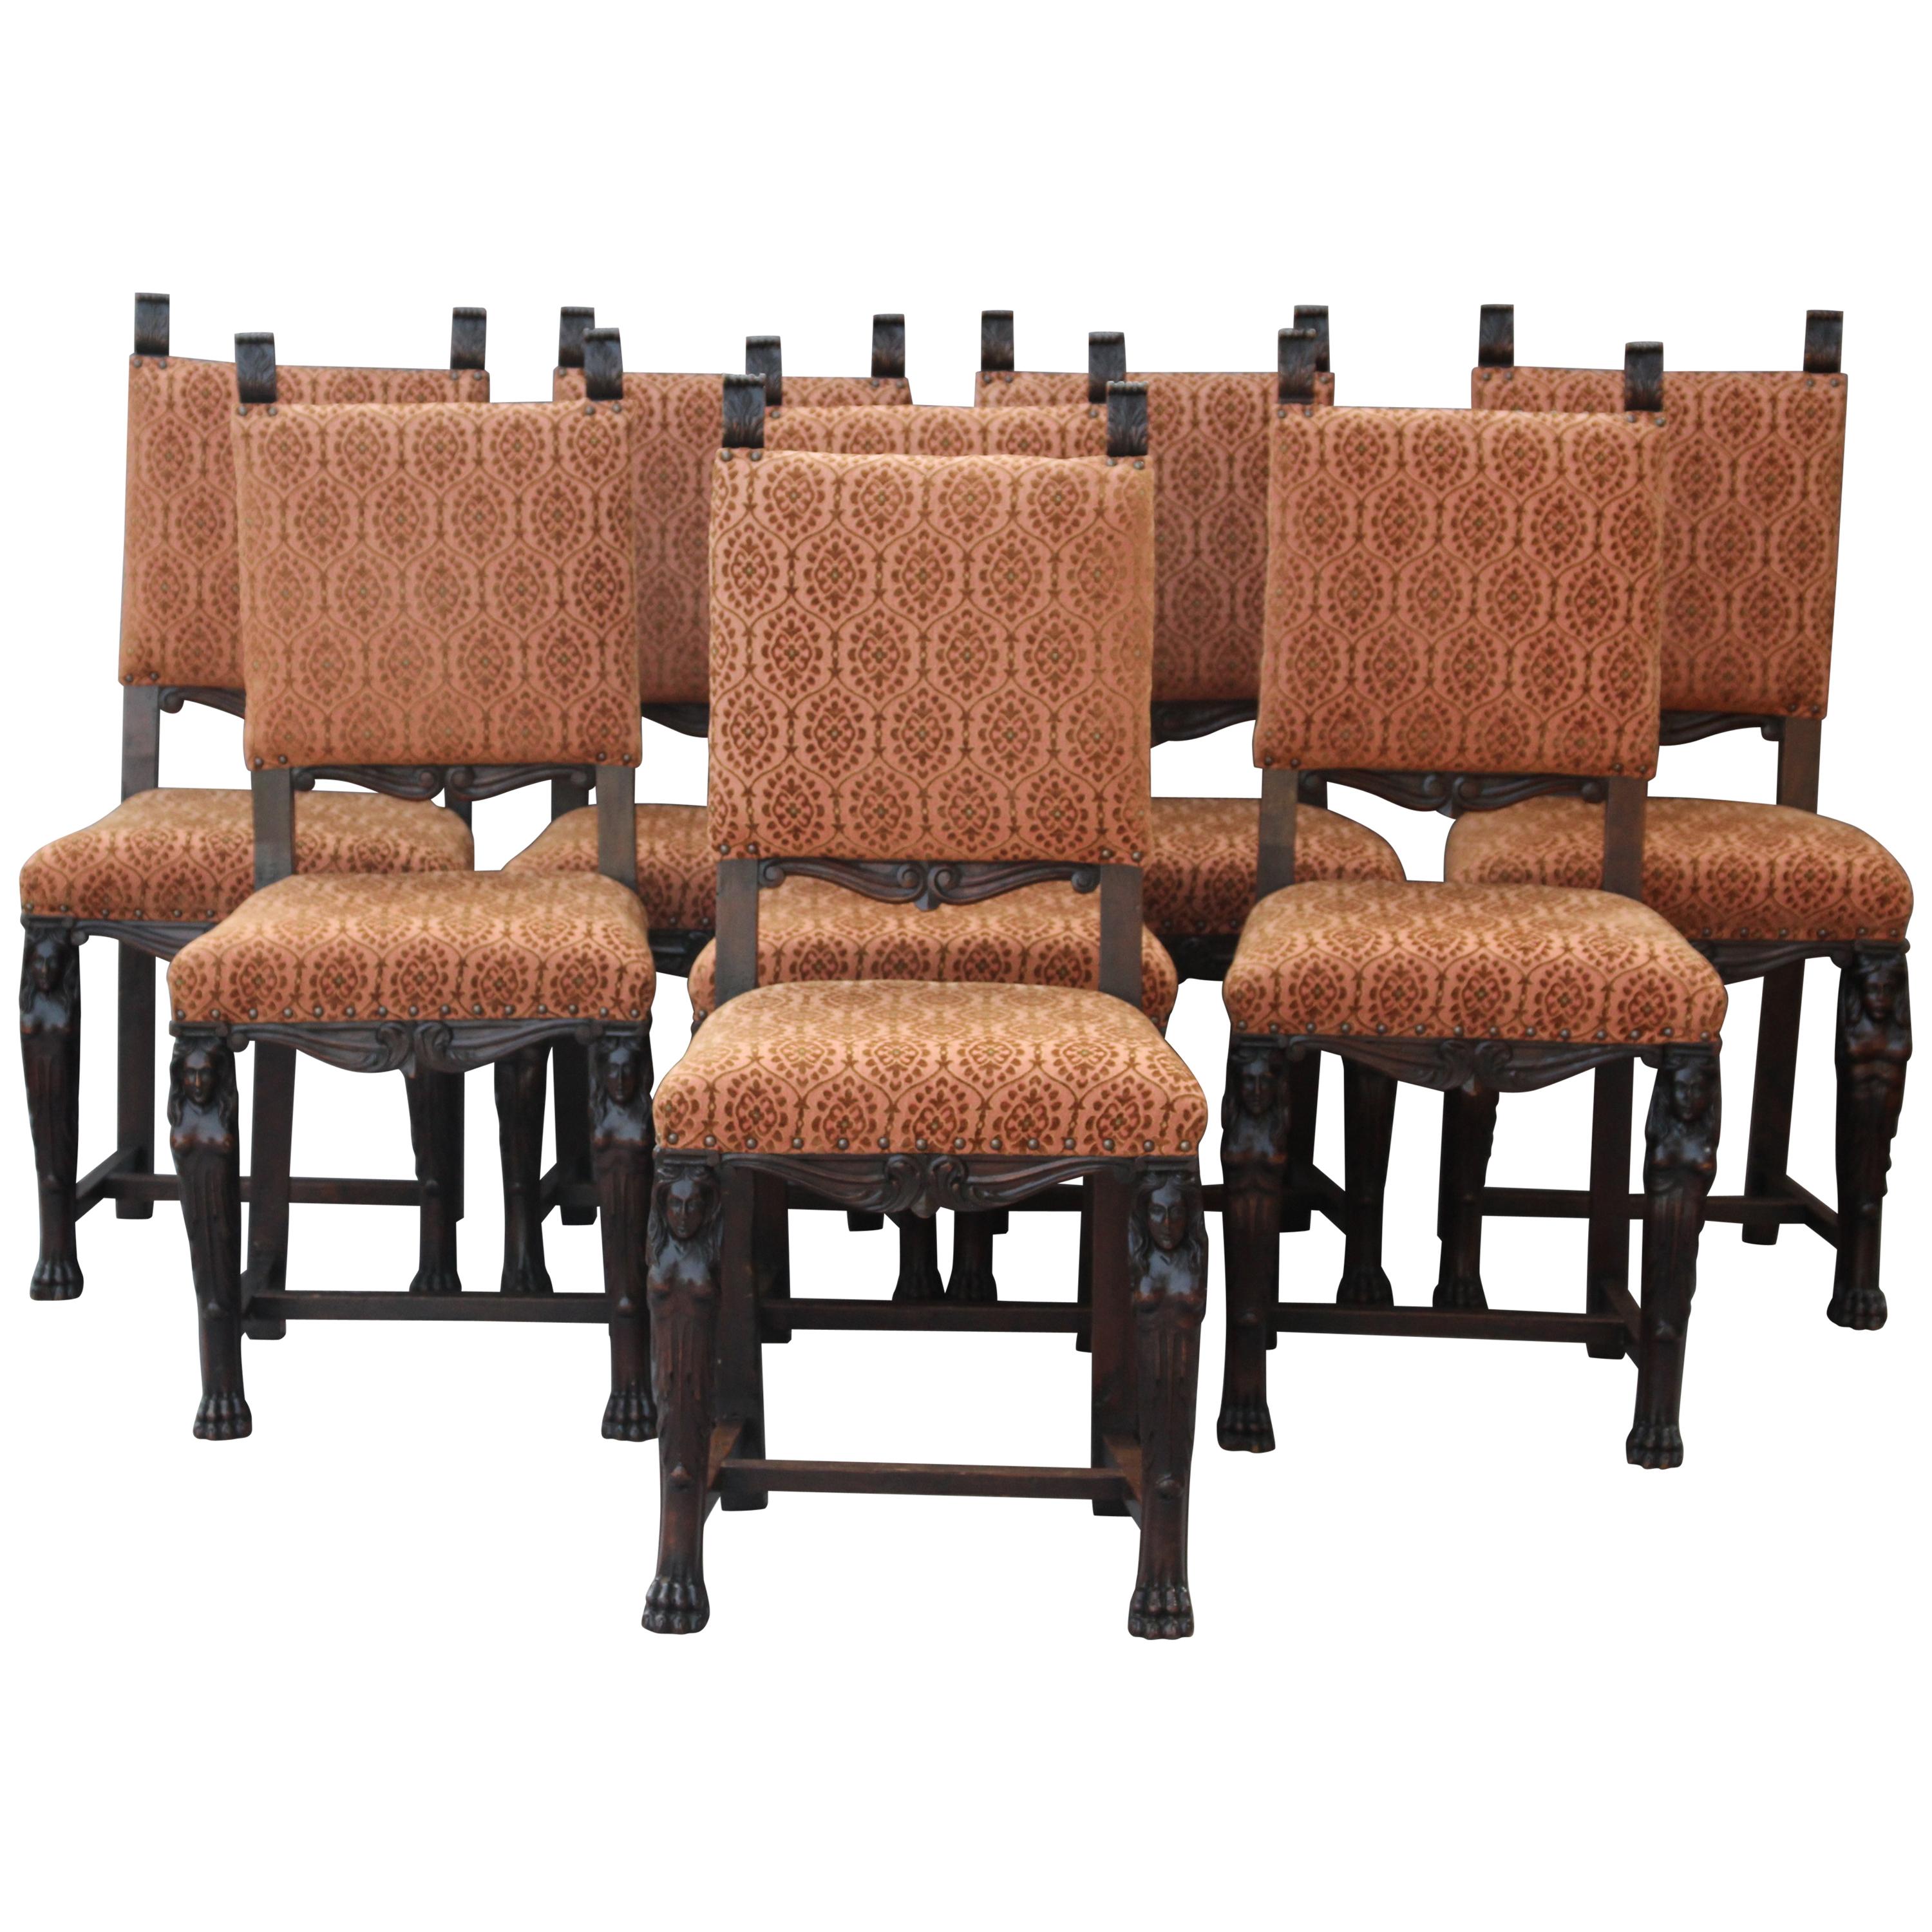 Wonderful Carved Walnut 1920s Set of Eight Spanish Revival Chairs